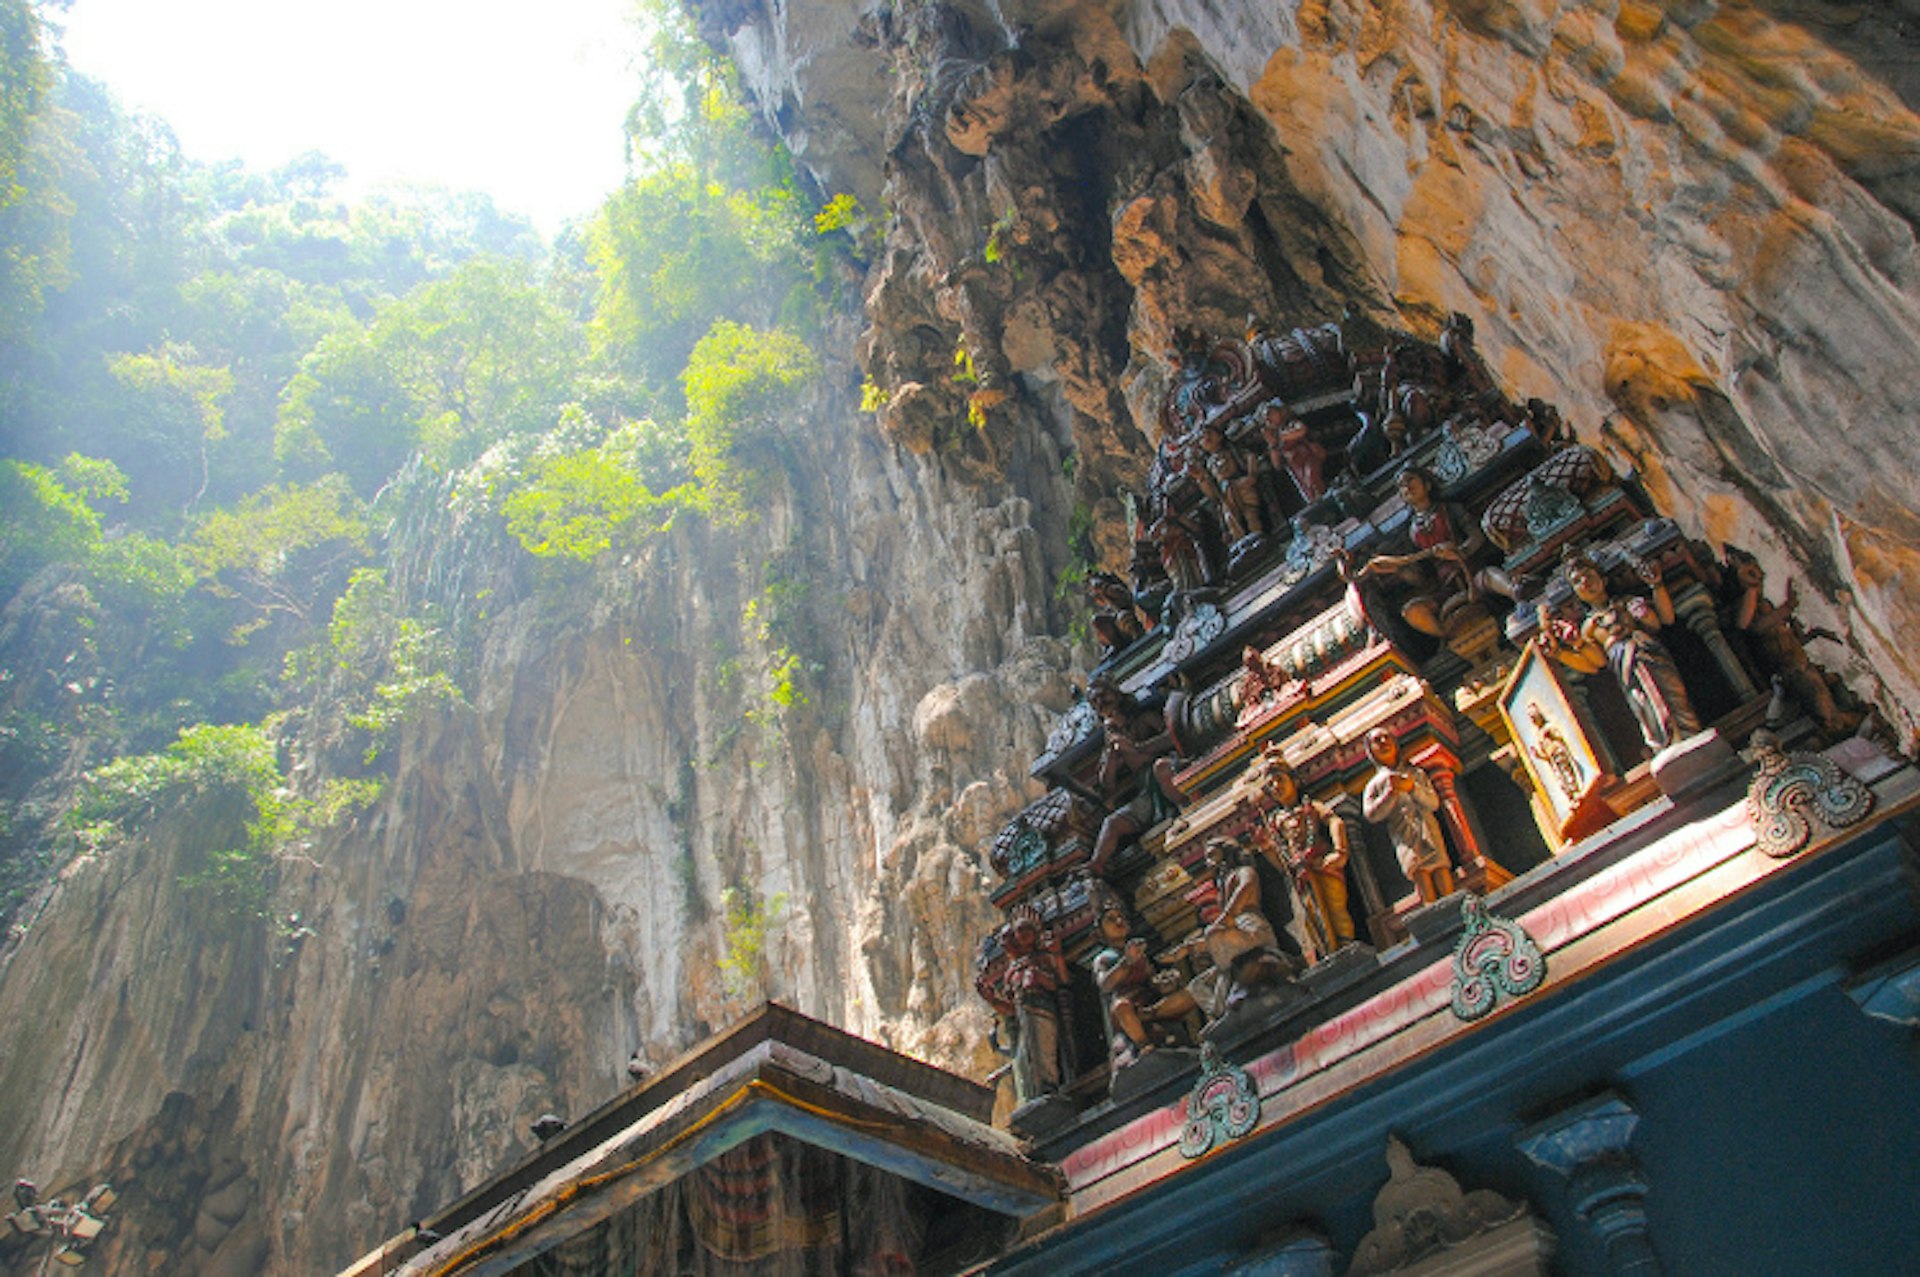 Vertiginous cliffs and shadowy caves are an impressive setting for Batu Caves near KL. Image by LWYang / CC BY 2.0